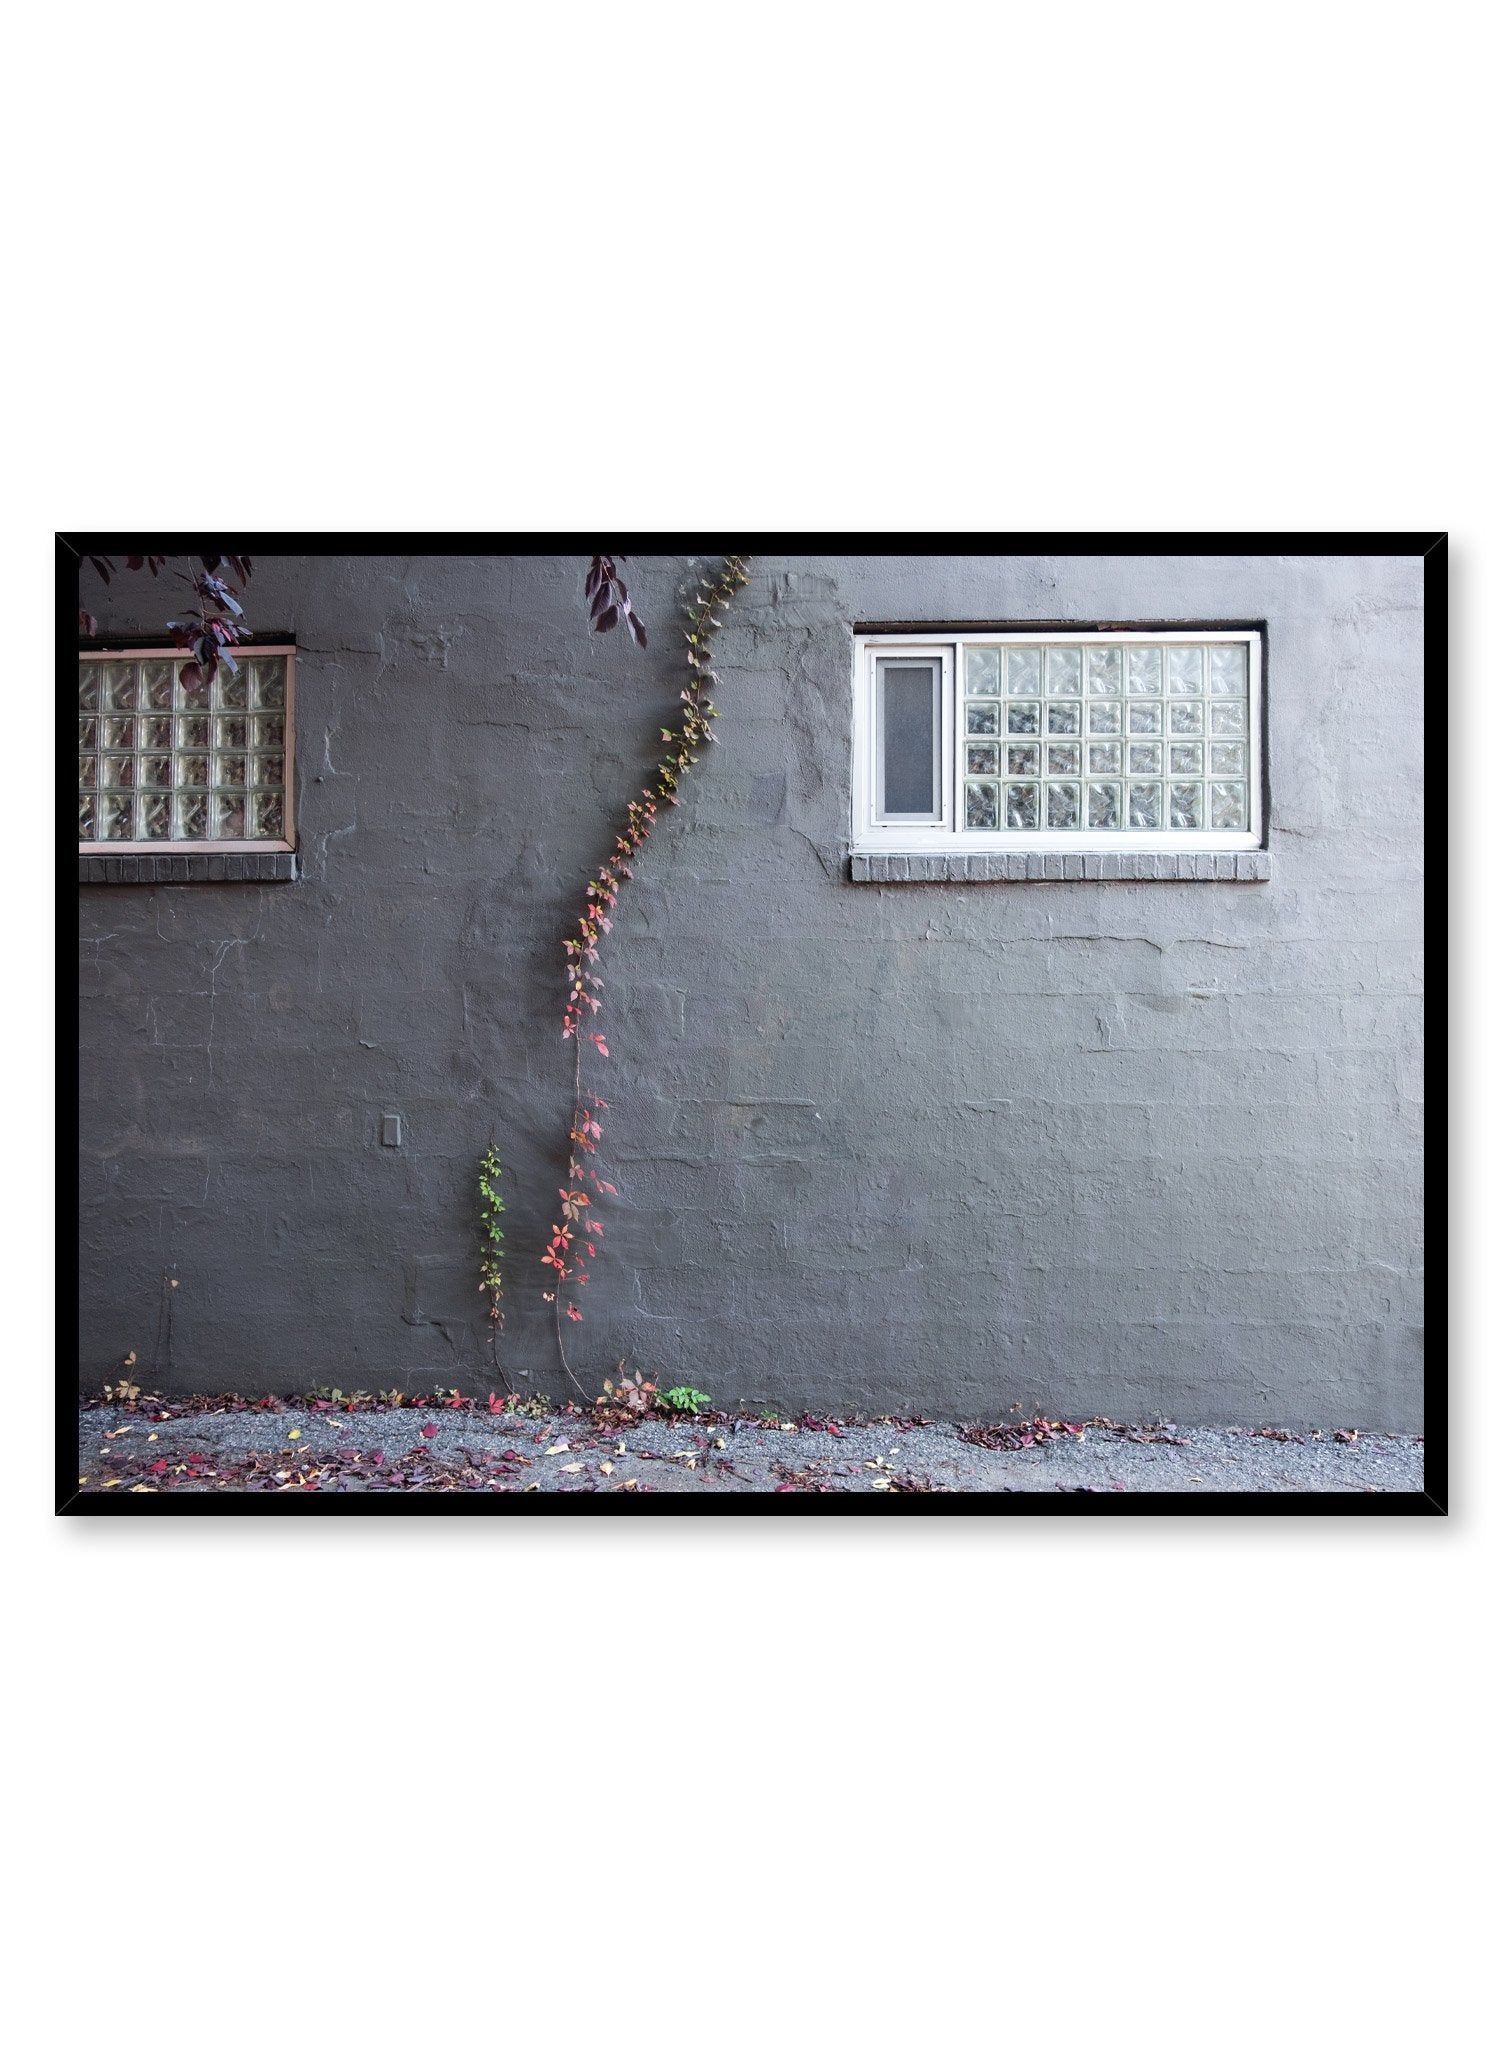 Minimalist design poster by Opposite Wall with urban photography of grey wall